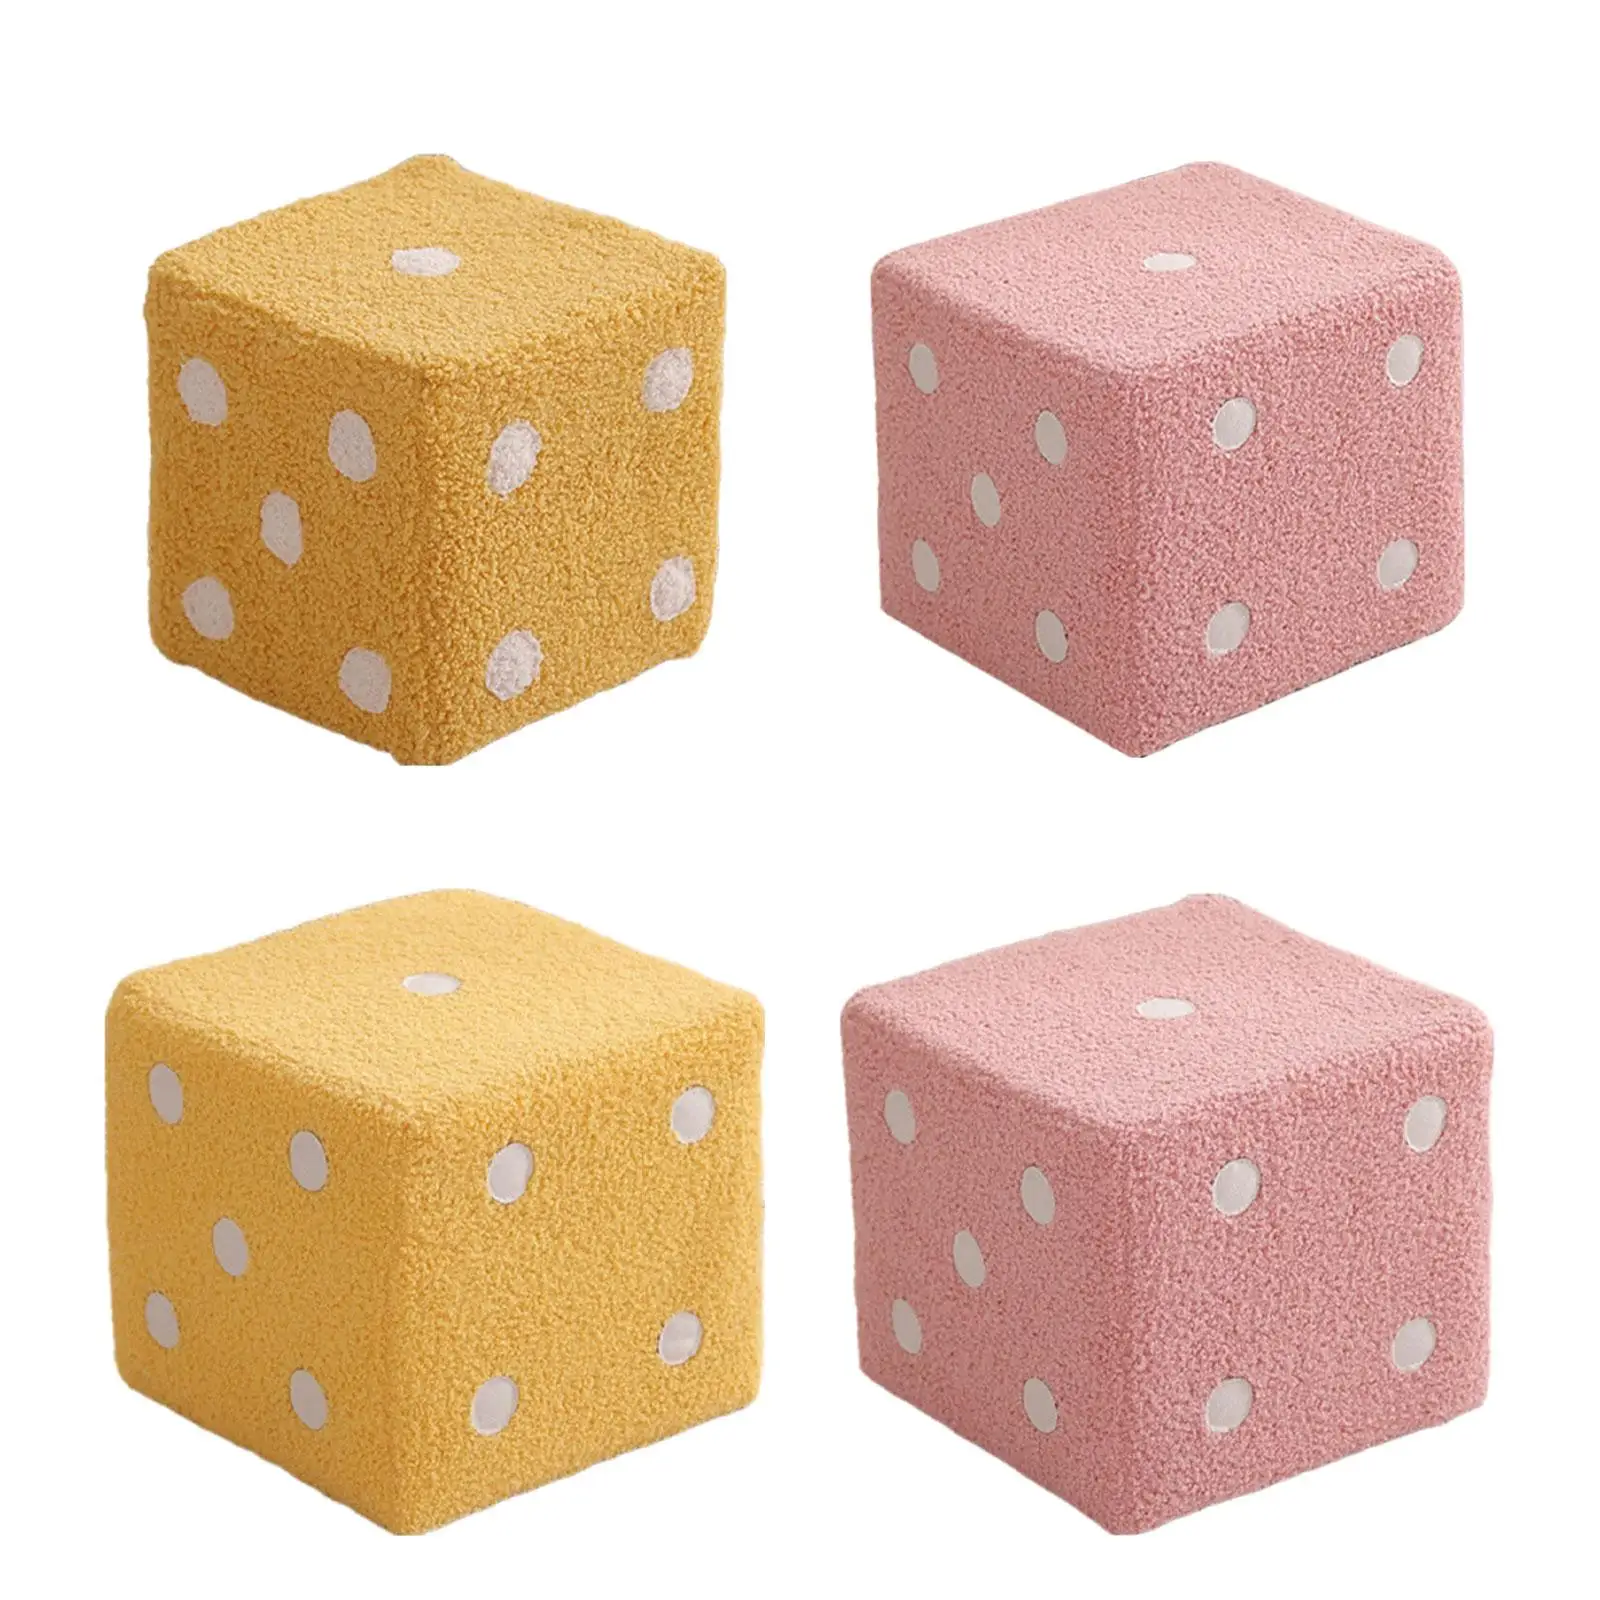 Footstool Stepstool Dice Design Chair Creative Stool Stable Sofa Tea Stool for Living Room Apartment Entryway Bedroom Bedside